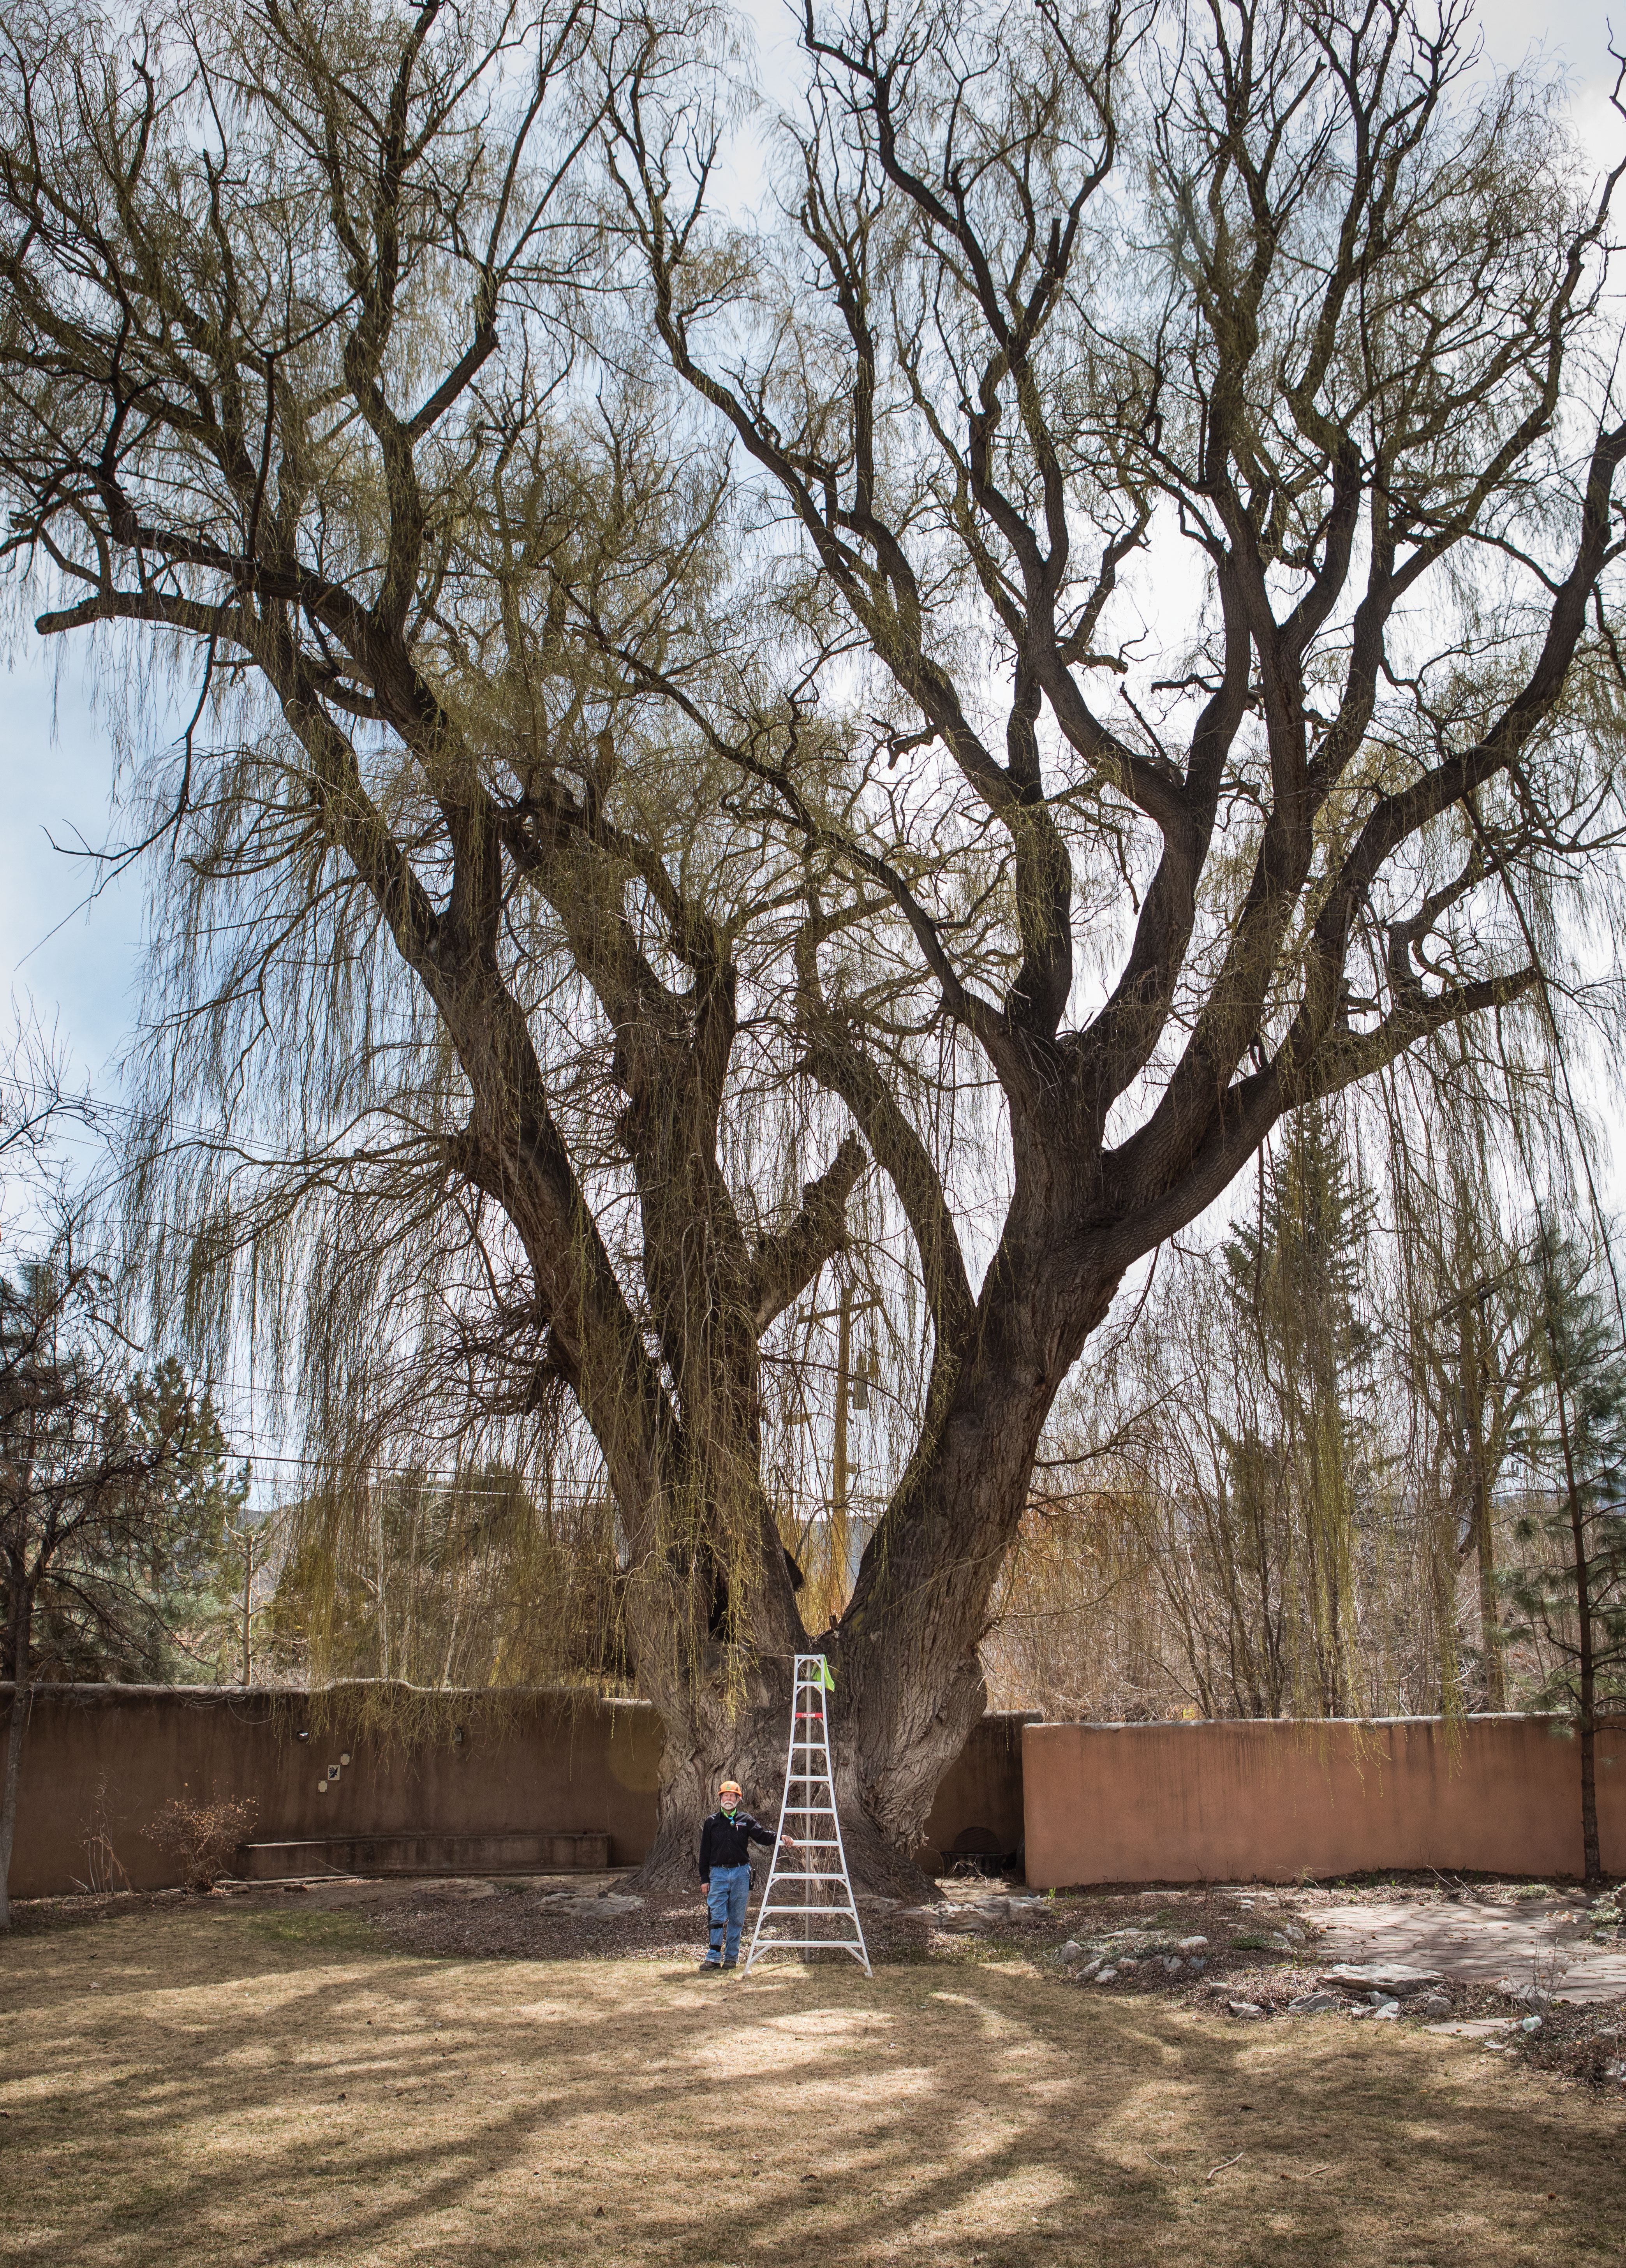 A National Champion Willow in Taos